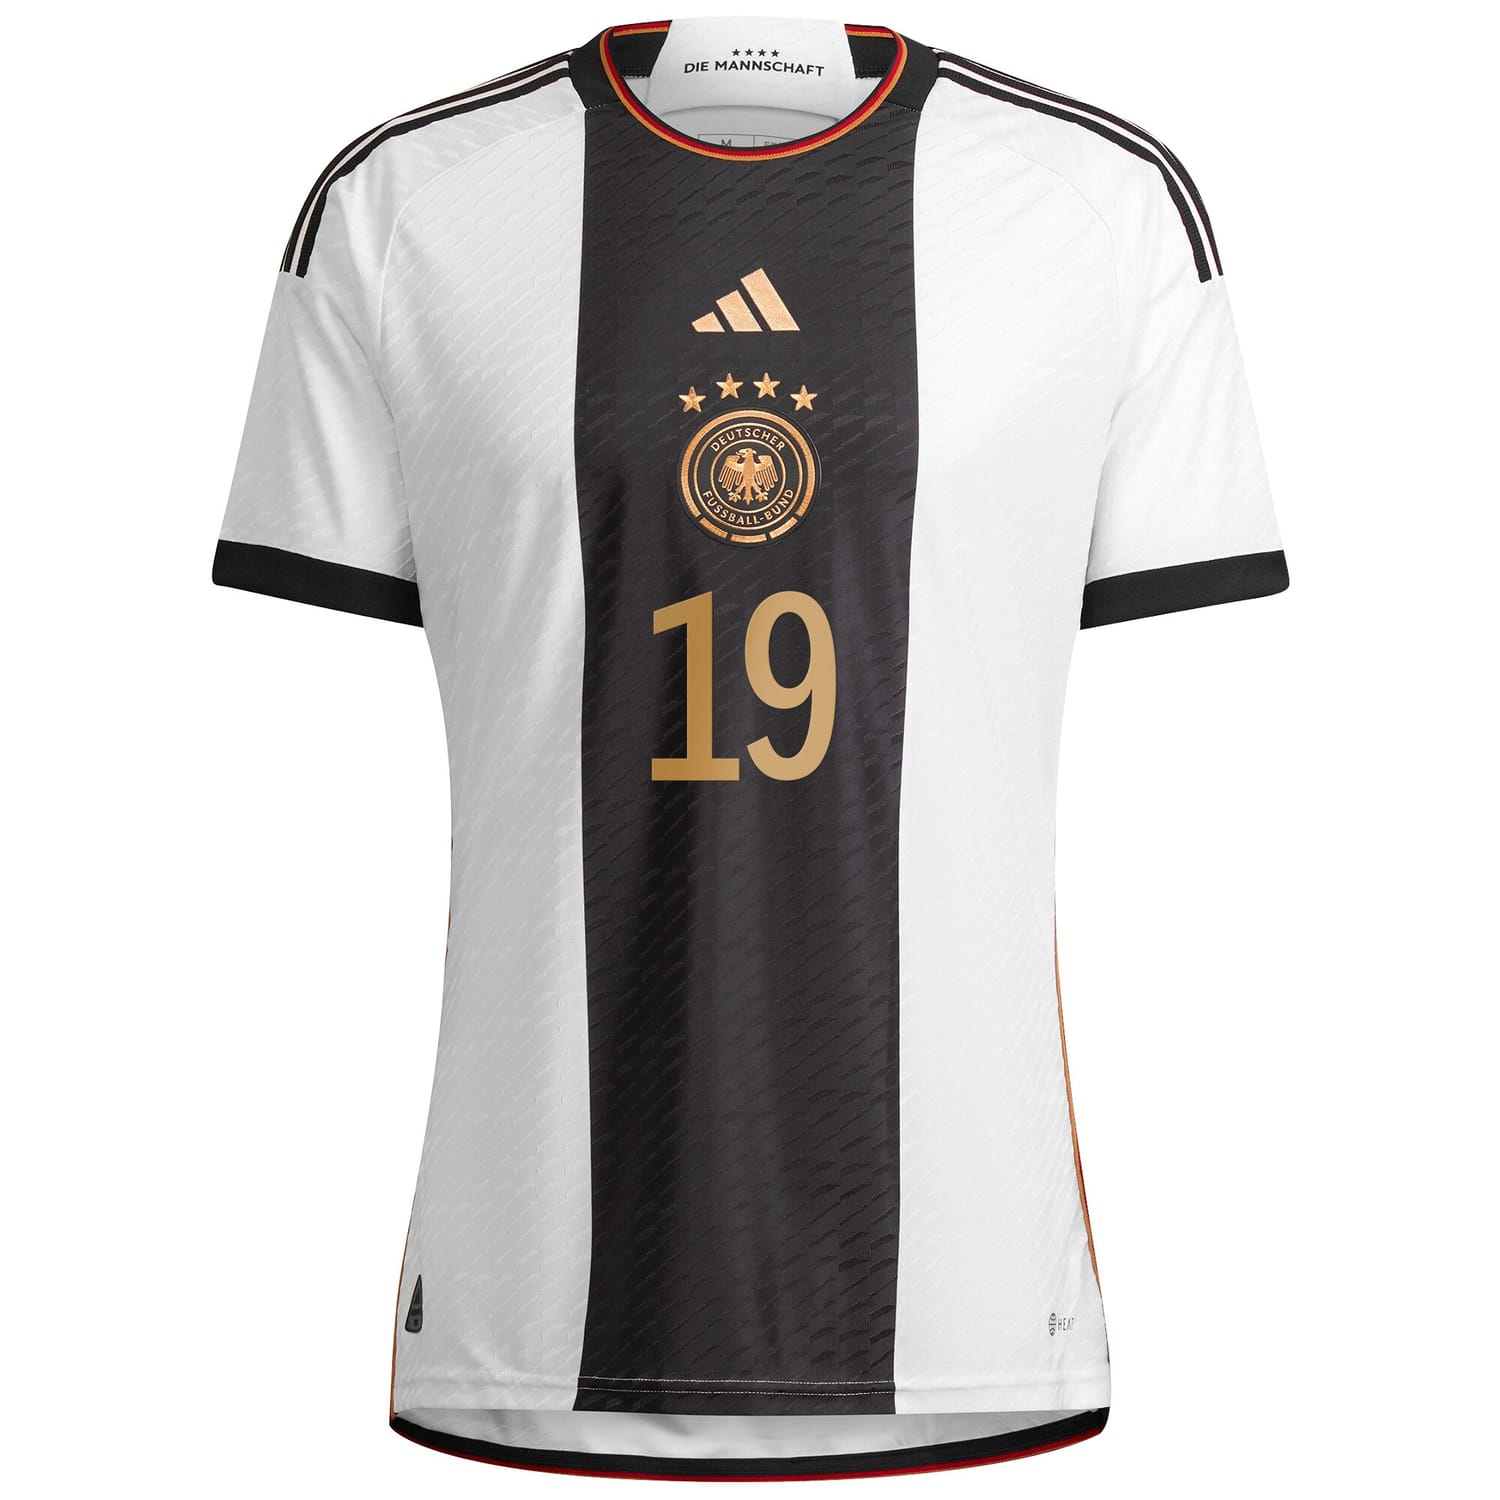 Germany National Team Home Authentic Jersey Shirt player Leroy Sané 19 printing for Men